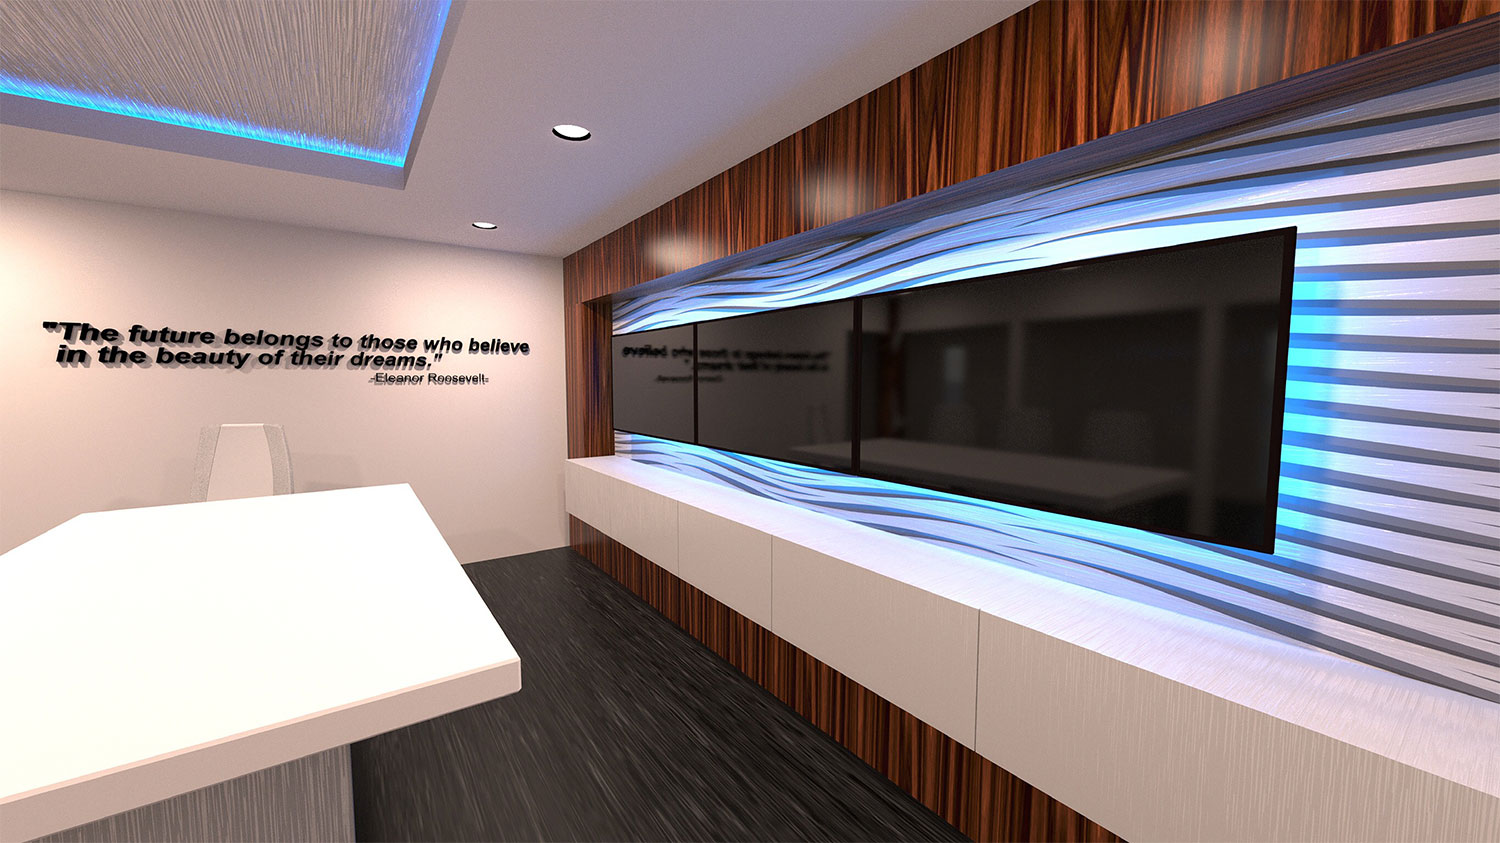 D rendering of conference room in office building. The room has a large table 3 TV's hung up on the wall and an Eleanor Roosevelt quote hanging on the wall.